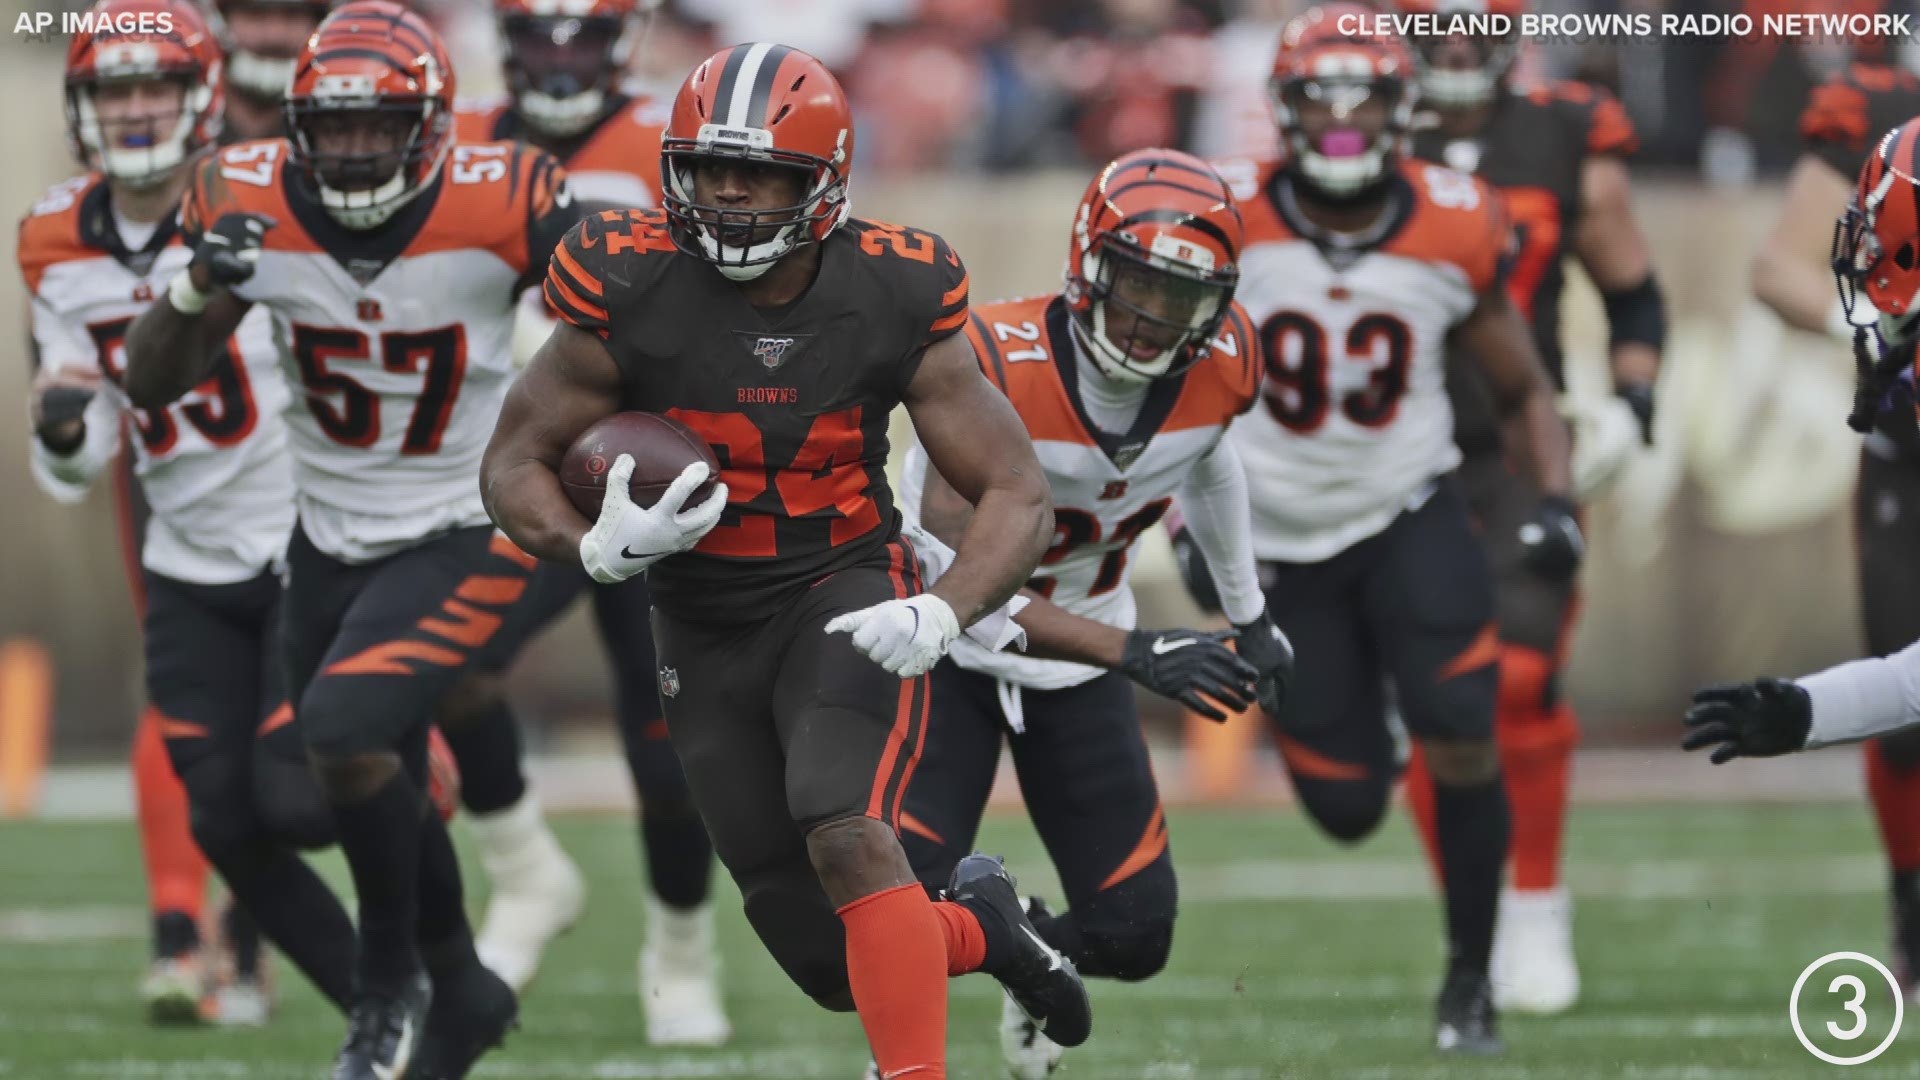 Cleveland Browns running back Nick Chubb made up for lost time by breaking a 57-yard run early in the second half against the Cincinnati Bengals in Cleveland.